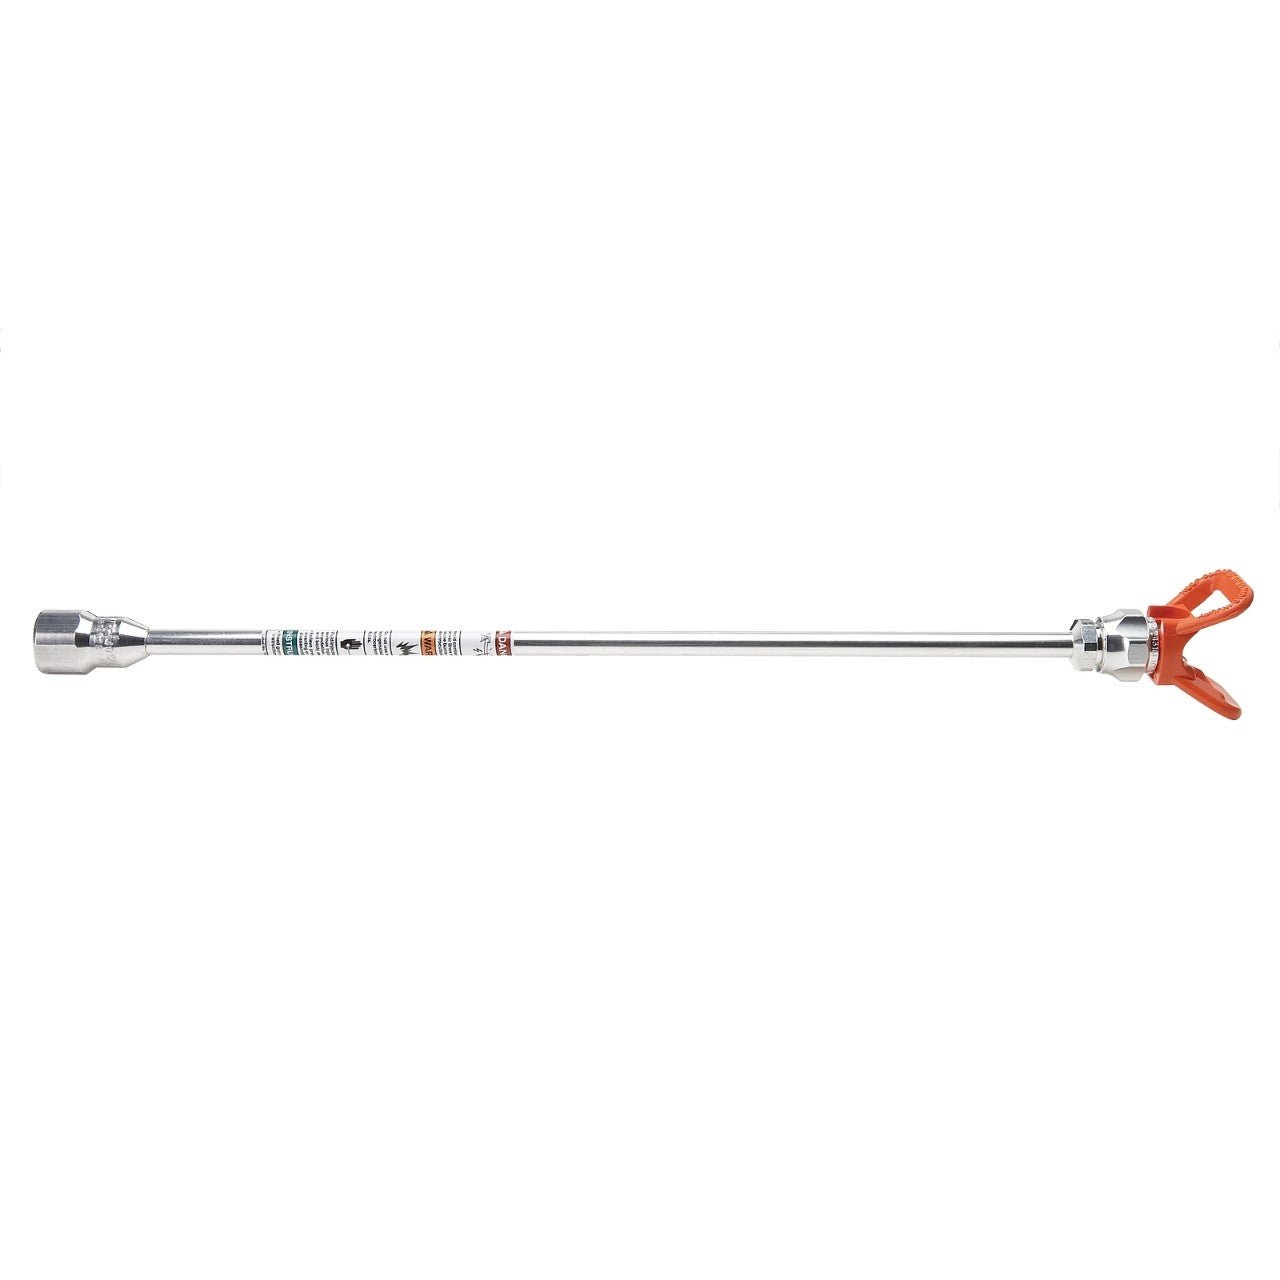 Graco RAC 5 Tip Extentions - Rossi Paint Stores - 15"